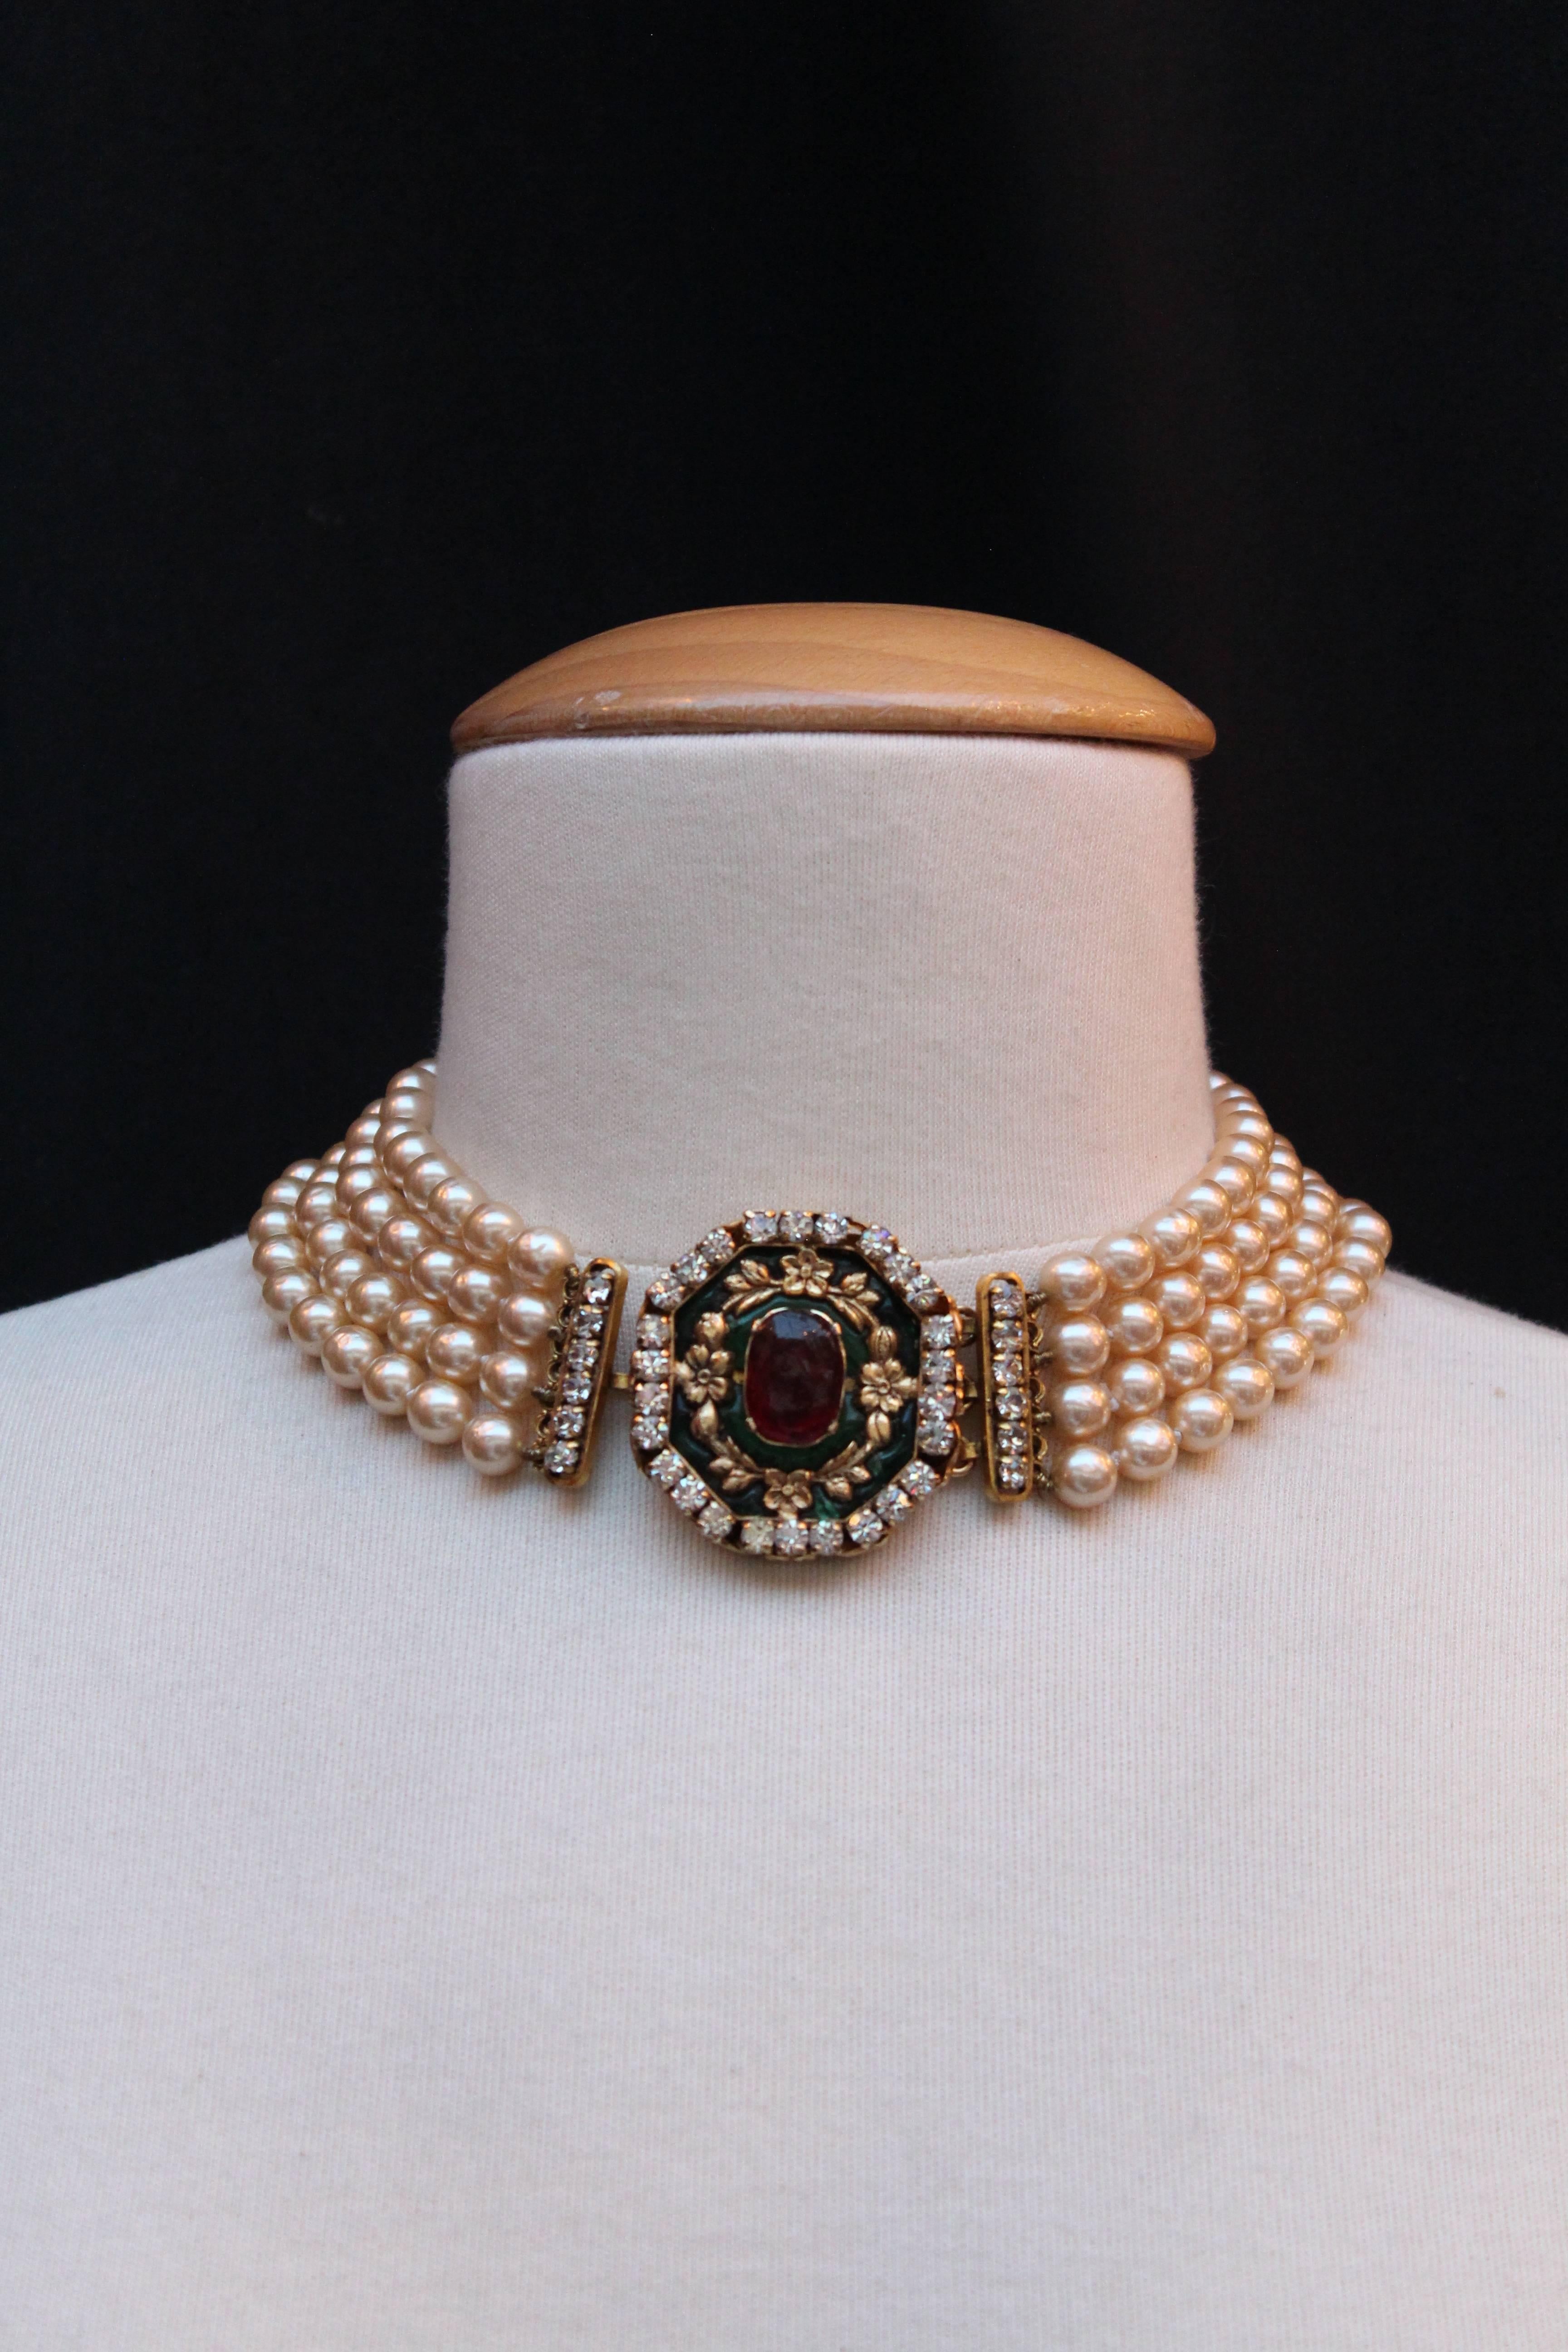 CHANEL (Made in France) Romantic-style choker created by Gripoix workshop for Chanel. It is comprised of four strands of knot-mounted pearly beads and a magnificent jewel clasp representing a gilded metal medallion.  A center  ruby glass paste